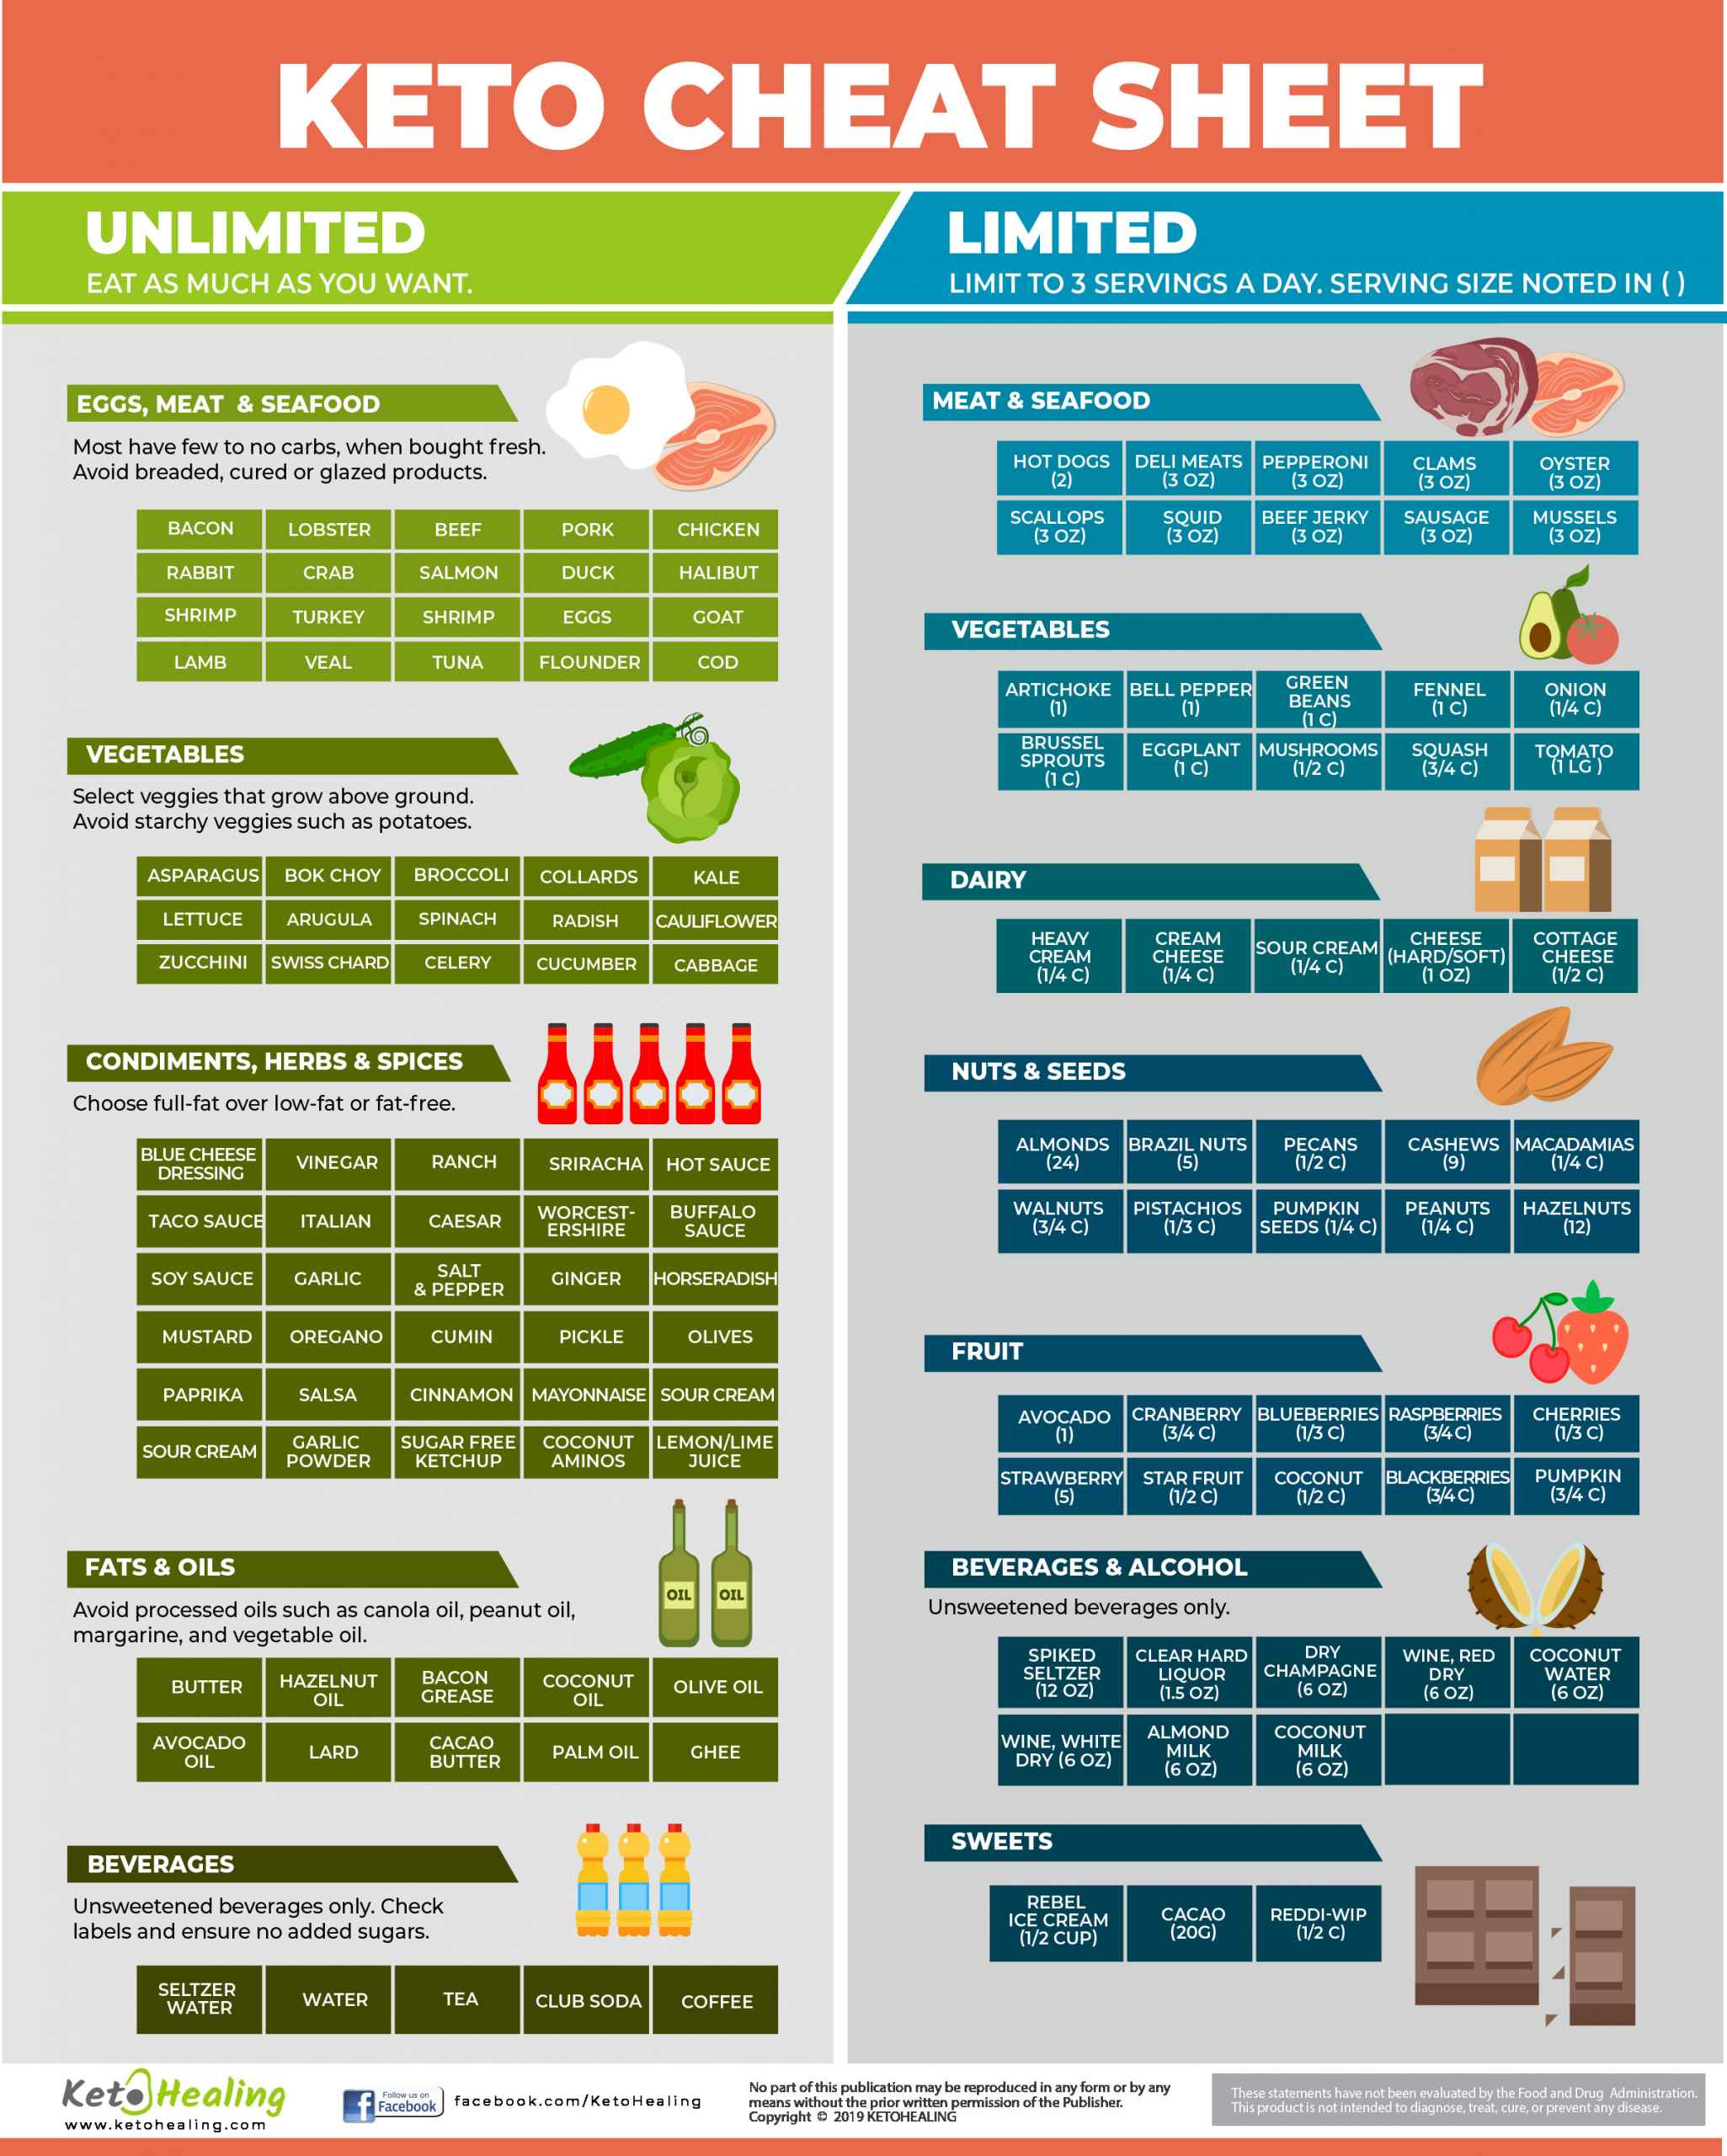 Cheating On Keto Diet Awesome Keto Cheat Sheet